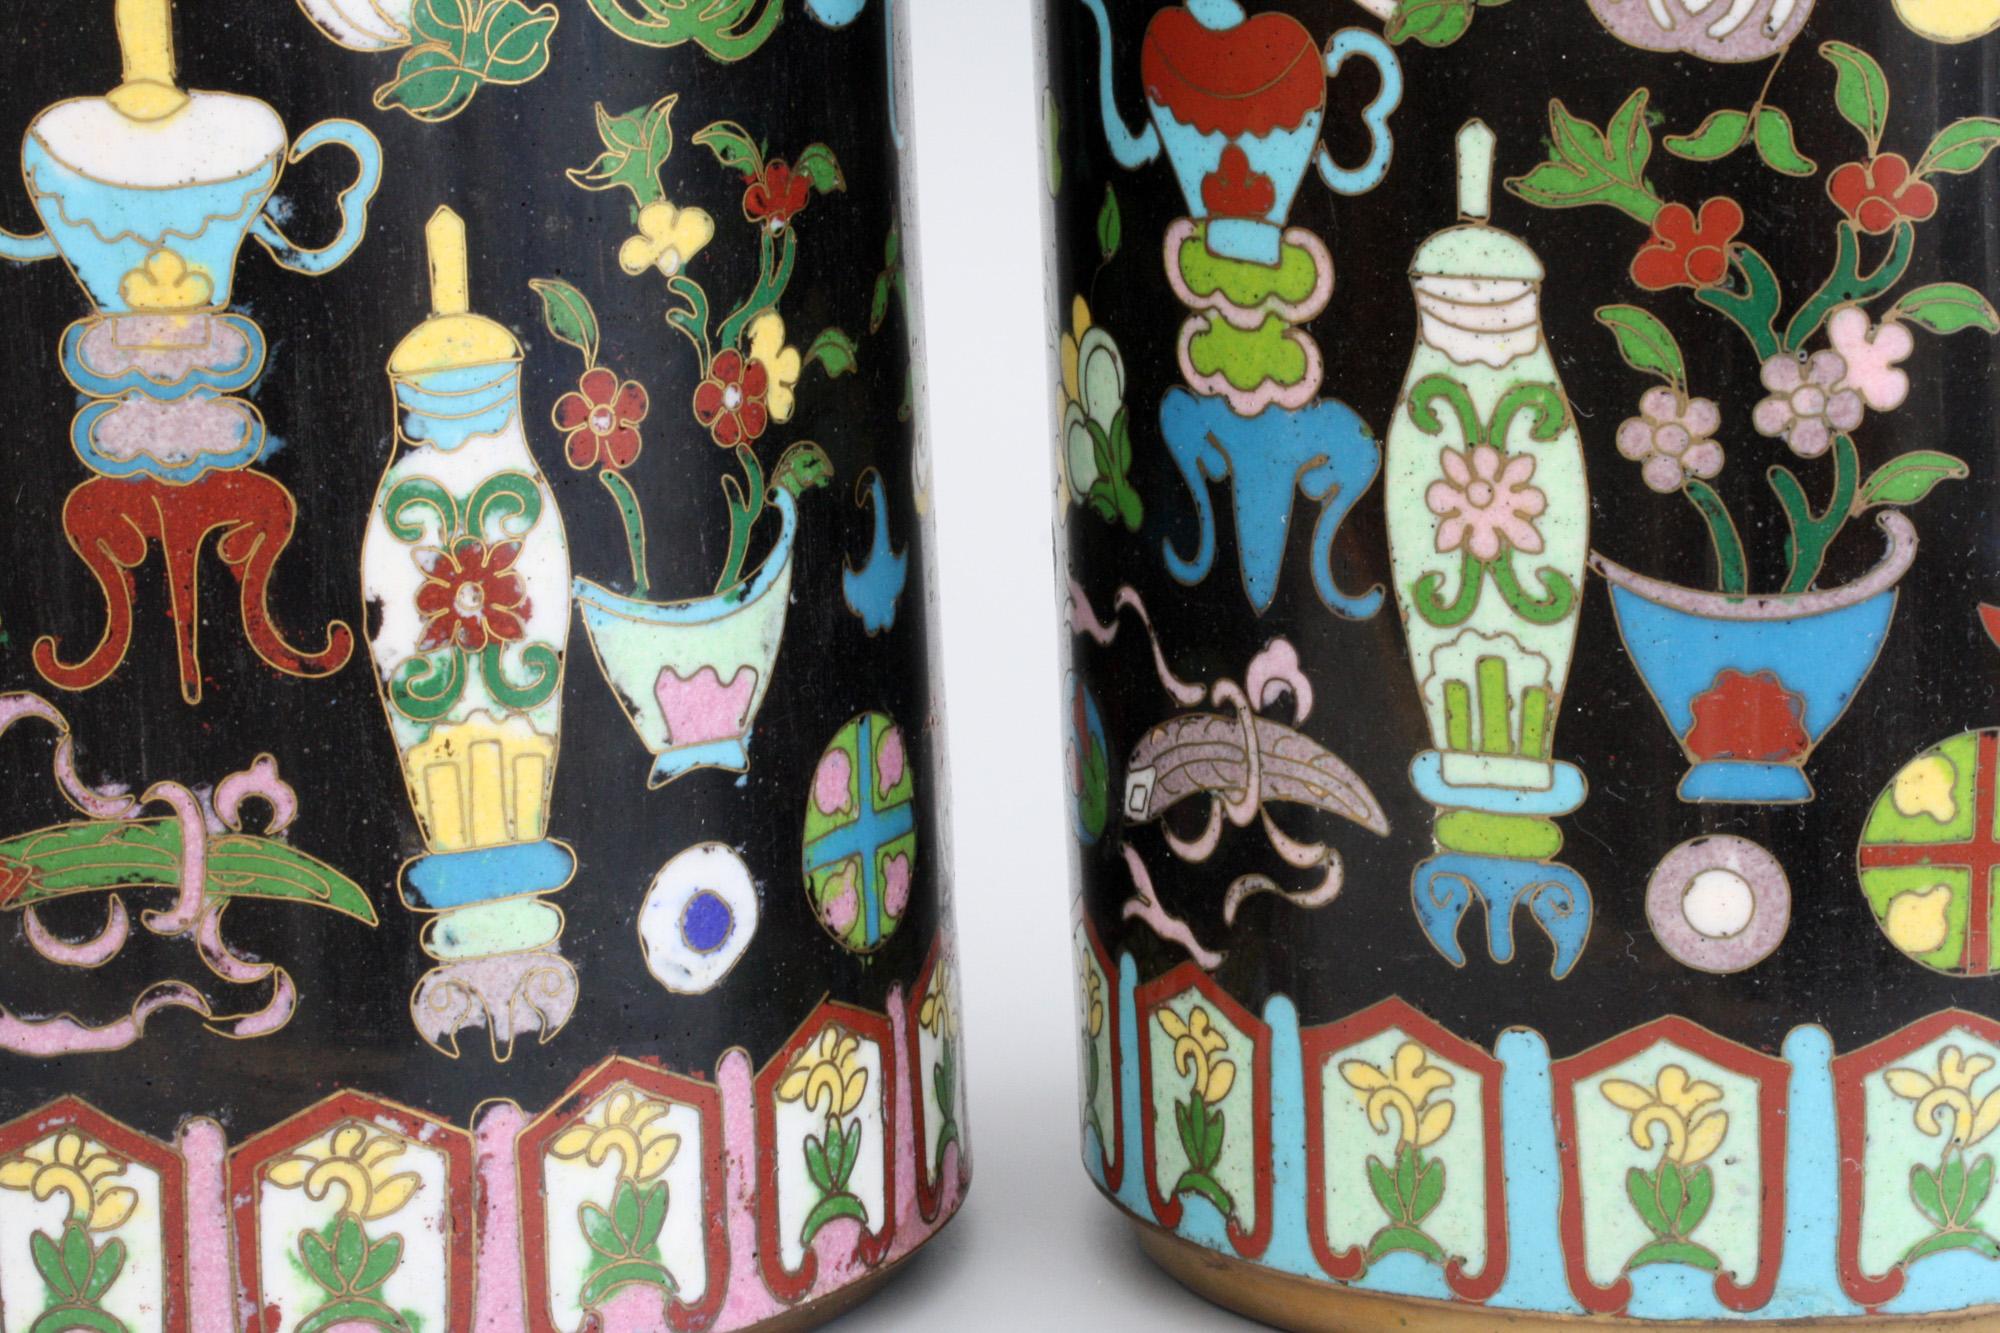 An exceptional and stunning pair cylindrical Chinese cloisonné enamel sleeve vases dating from the early 20th century, probably late Qing. The tall pair of vases are brightly decorated in colored enamels on black grounds decorated with scholars and